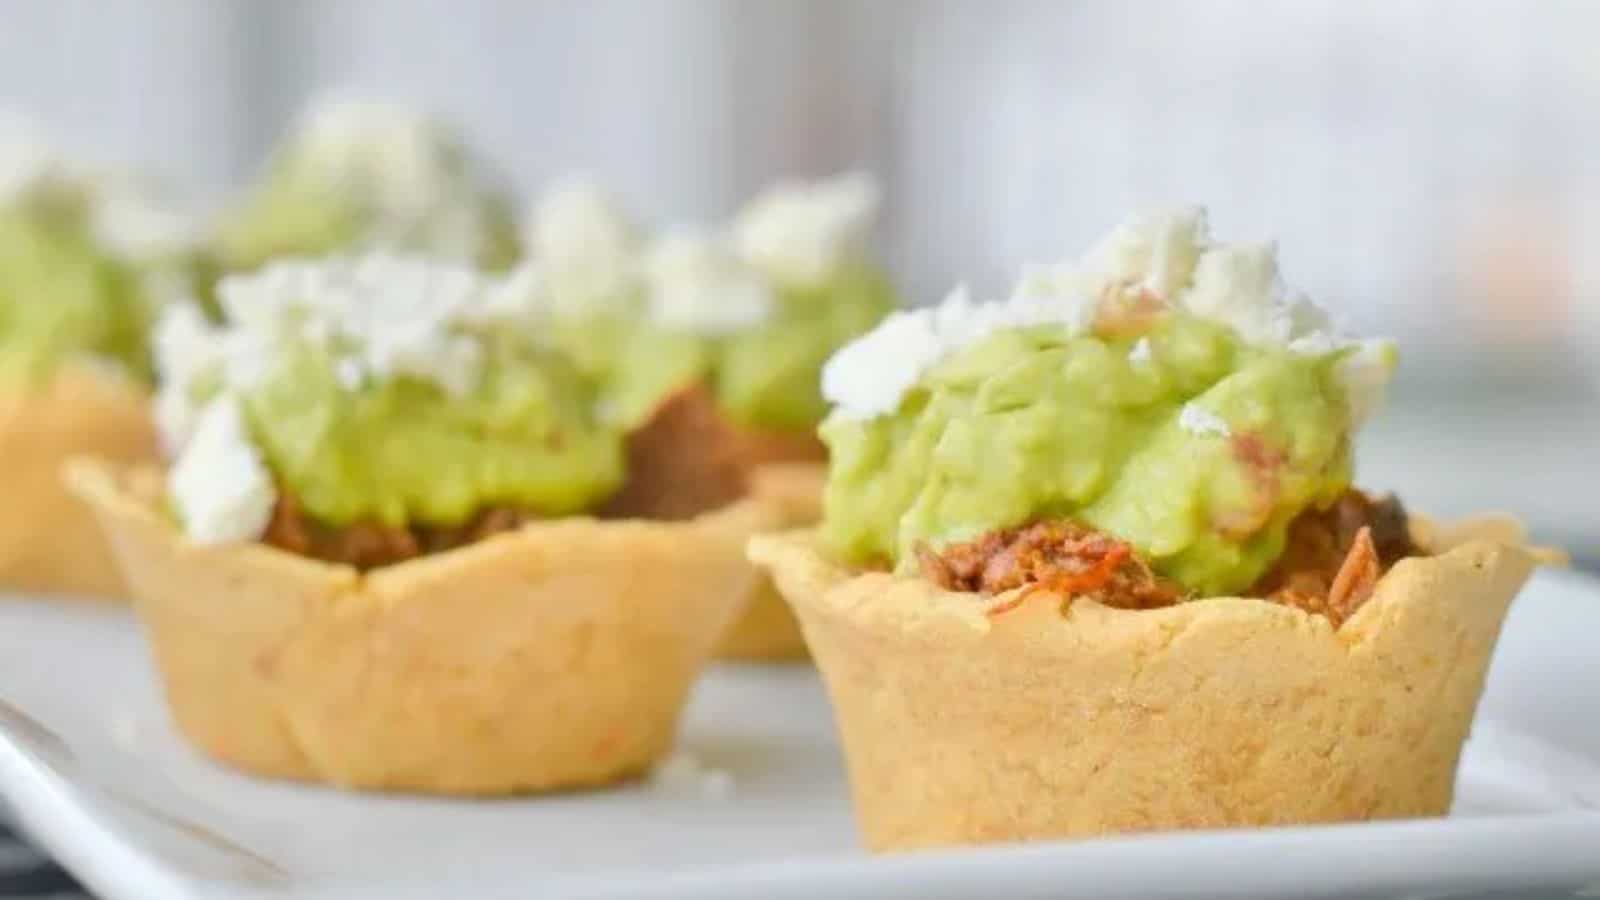 Image shows a close up head on view of Crockpot Mexican Beef in Masa Cups on a white tray, topped with guacamole and crumbled cotija cheese.